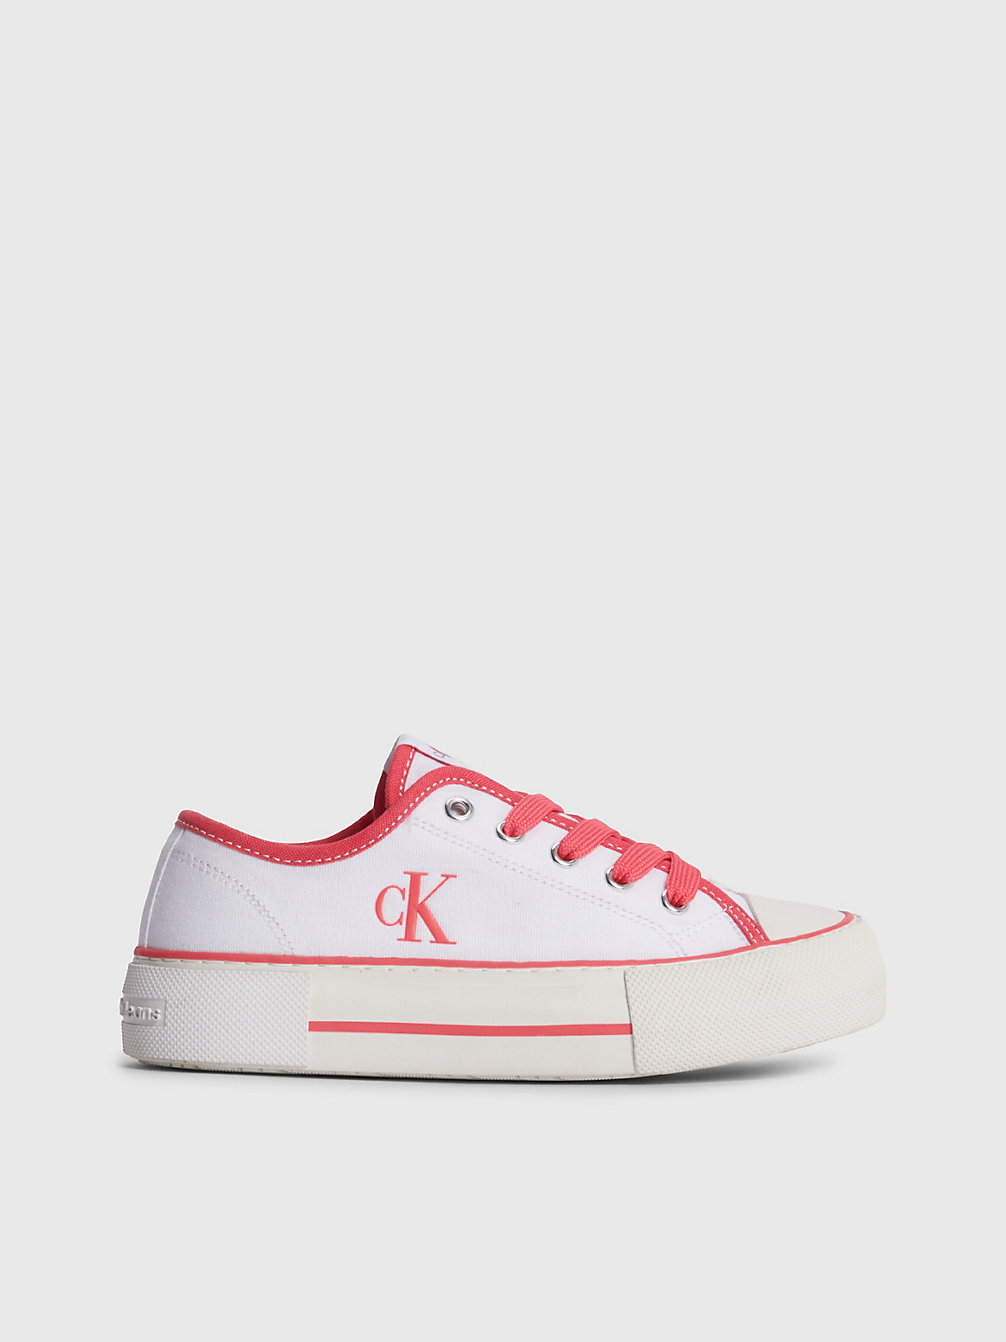 WHITE/FUCHSIA > Gerecycled Plateausneakers Voor Kdis > undefined girls - Calvin Klein